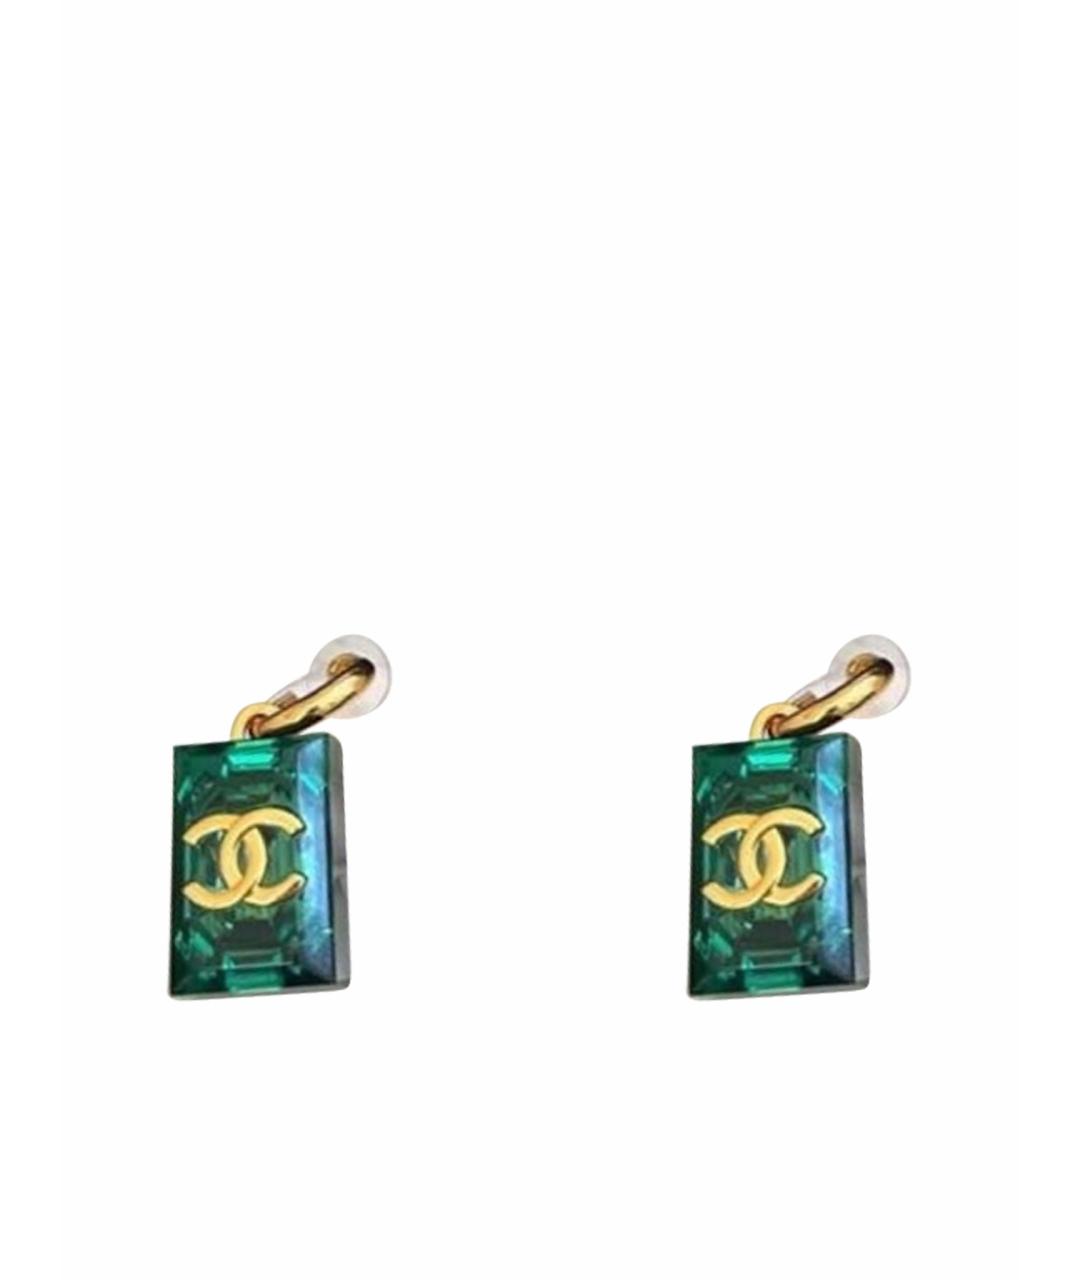 CHANEL PRE-OWNED Зеленые серьги, фото 1